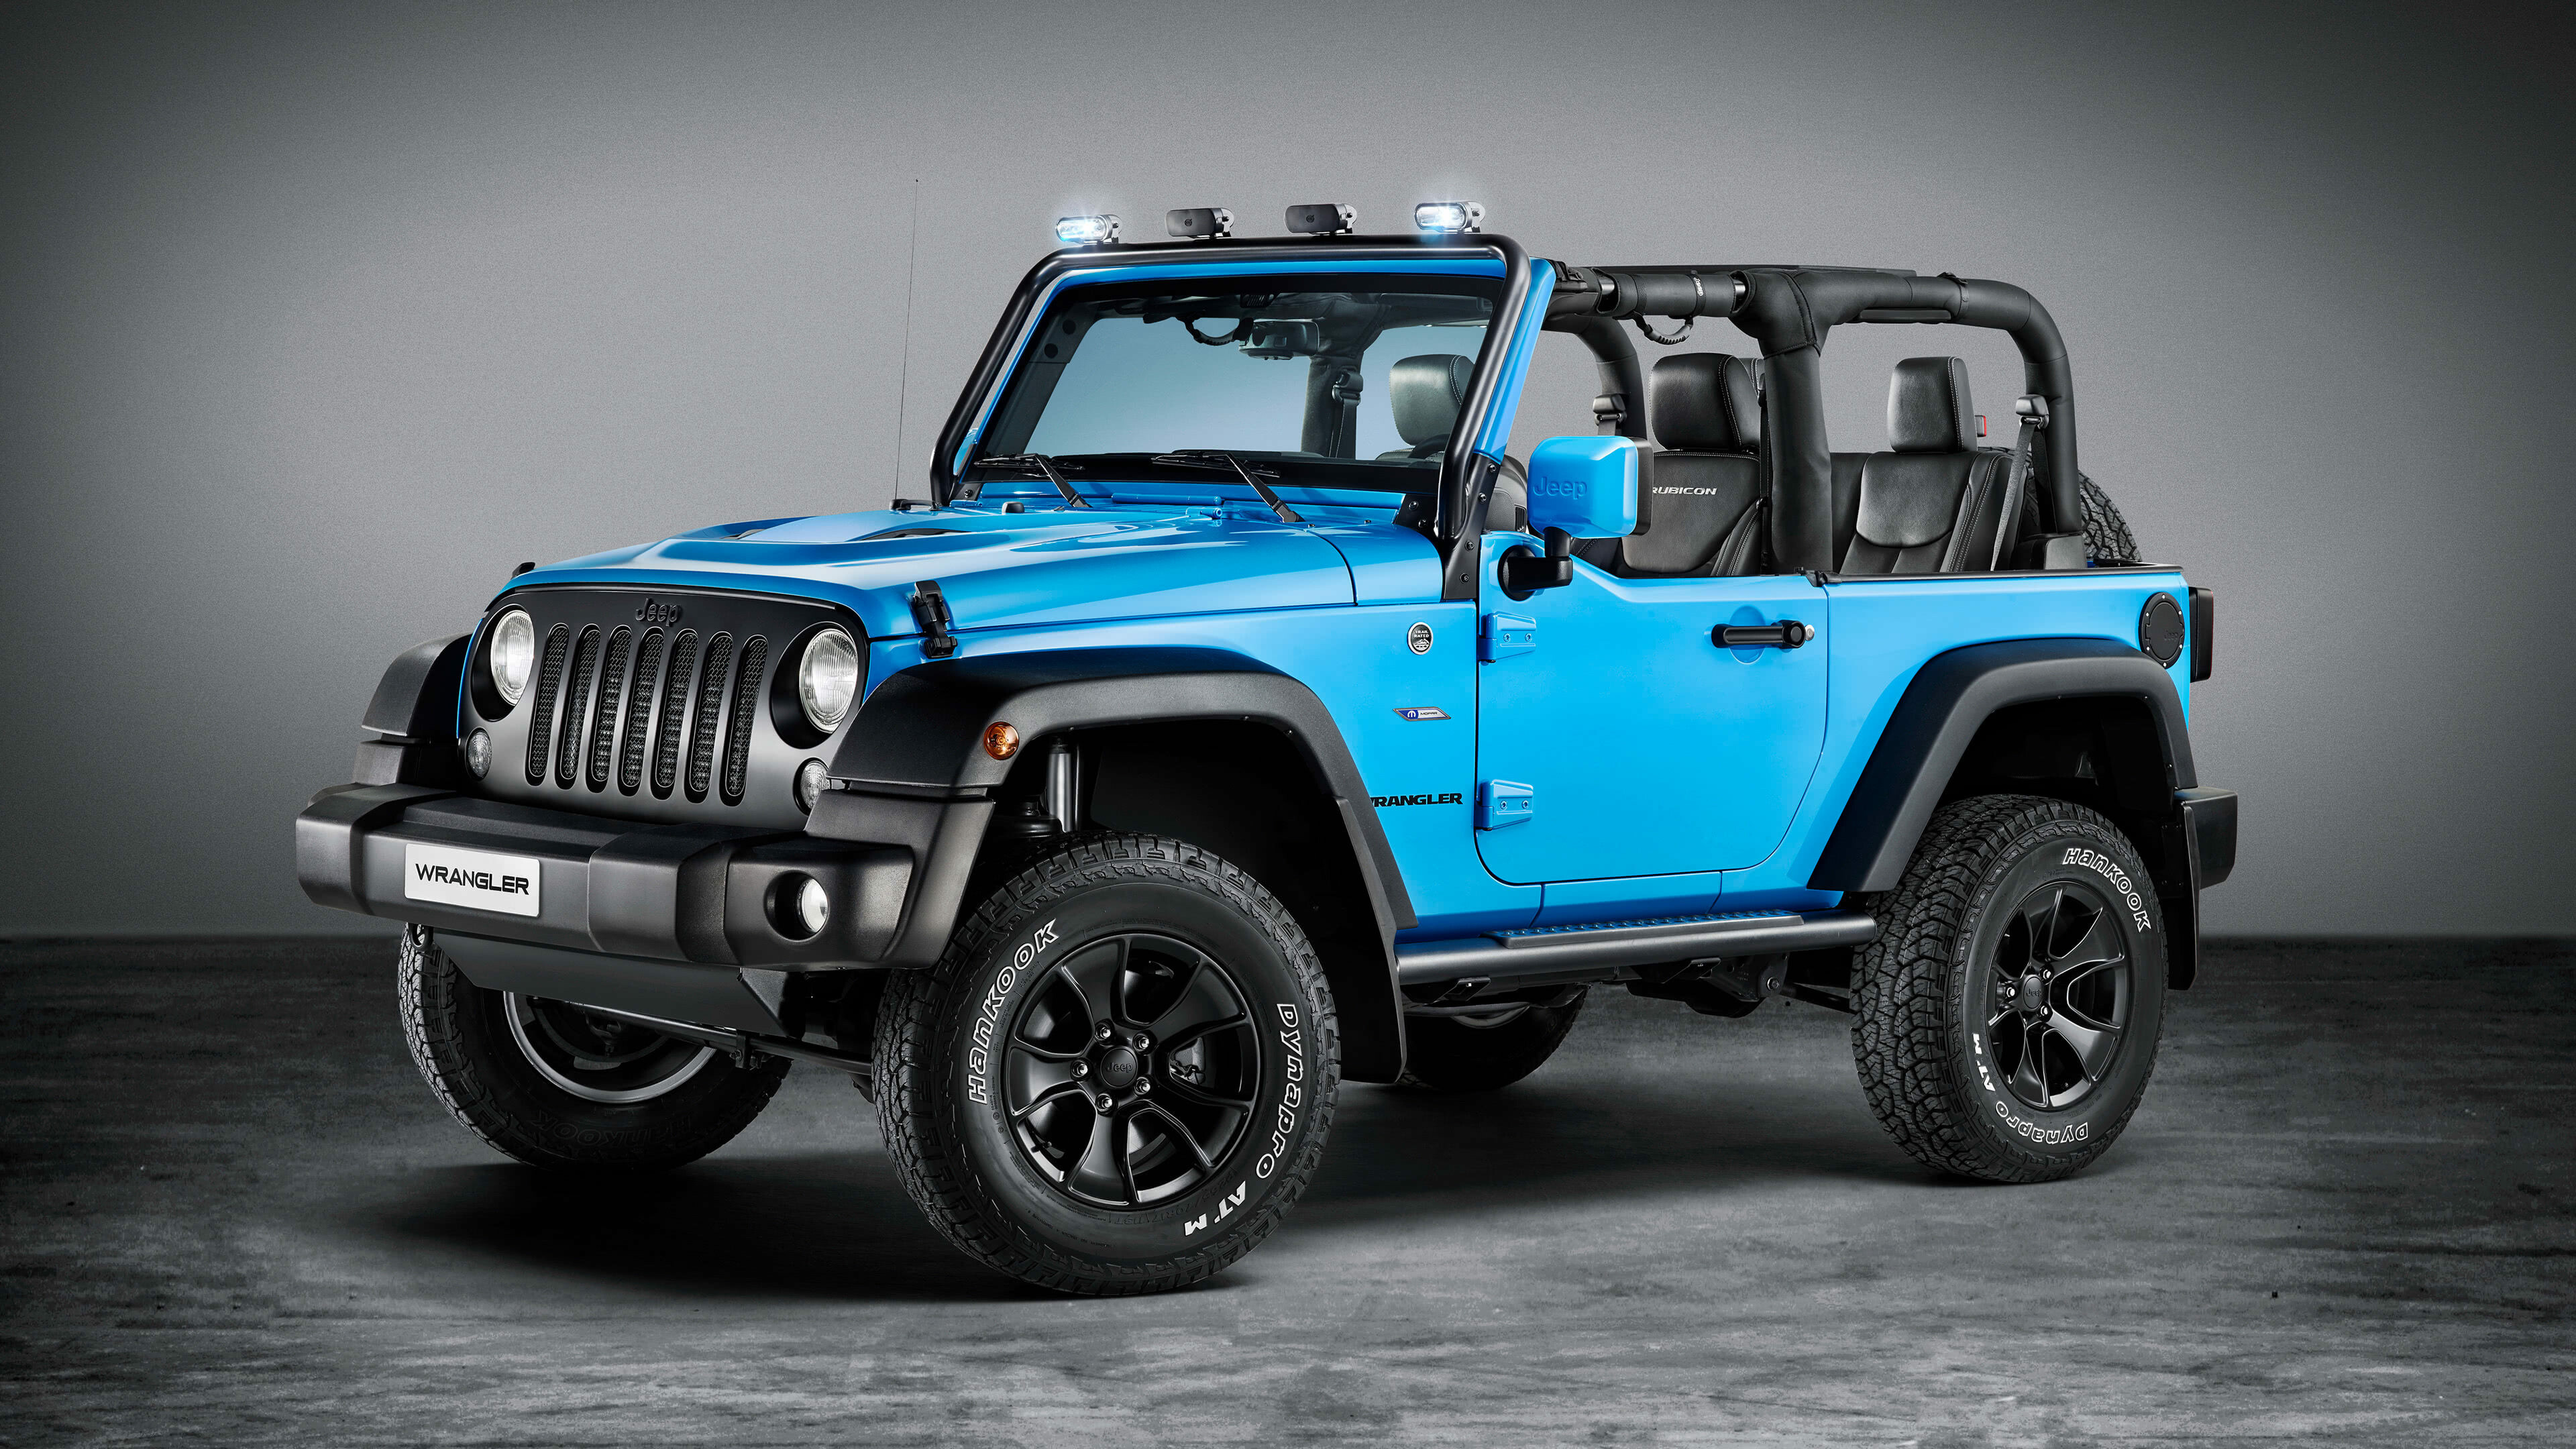 Jeep: The fourth generation Wrangler was introduced at the end of 2017. 3840x2160 4K Wallpaper.